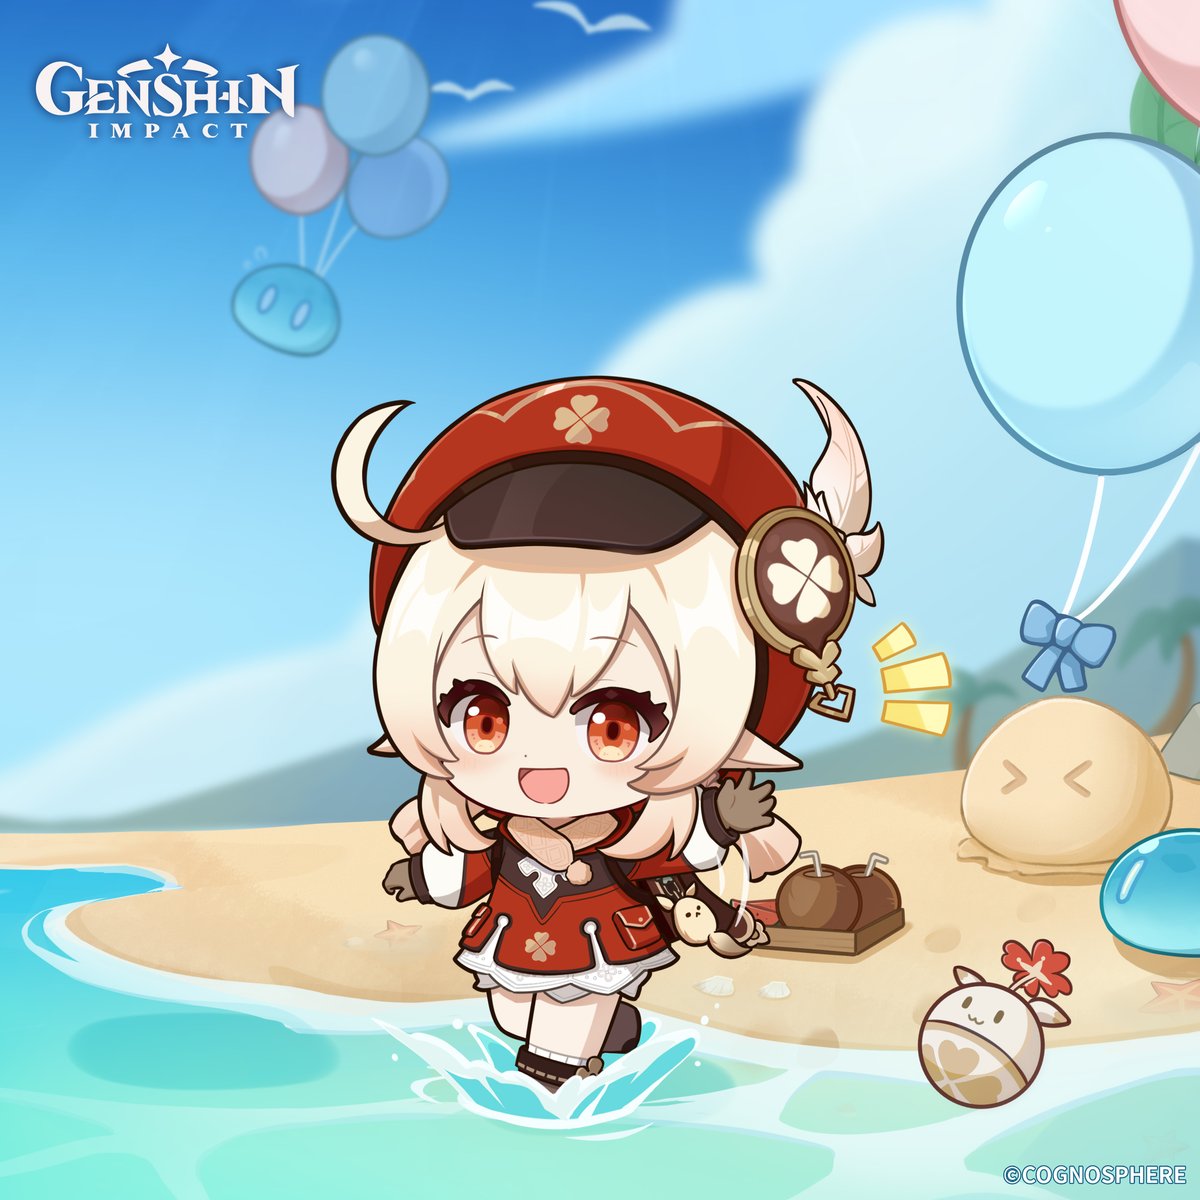 'Klee's coming! Come join us, Qiqi!'

The 'Joyous Summer' Community Event Series will be available on June 16!
Sharing this post will give you a chance to win a Guoba Plushie ×1! (20 winners in total across all platforms)

#GenshinImpact #SummerWithGenshin